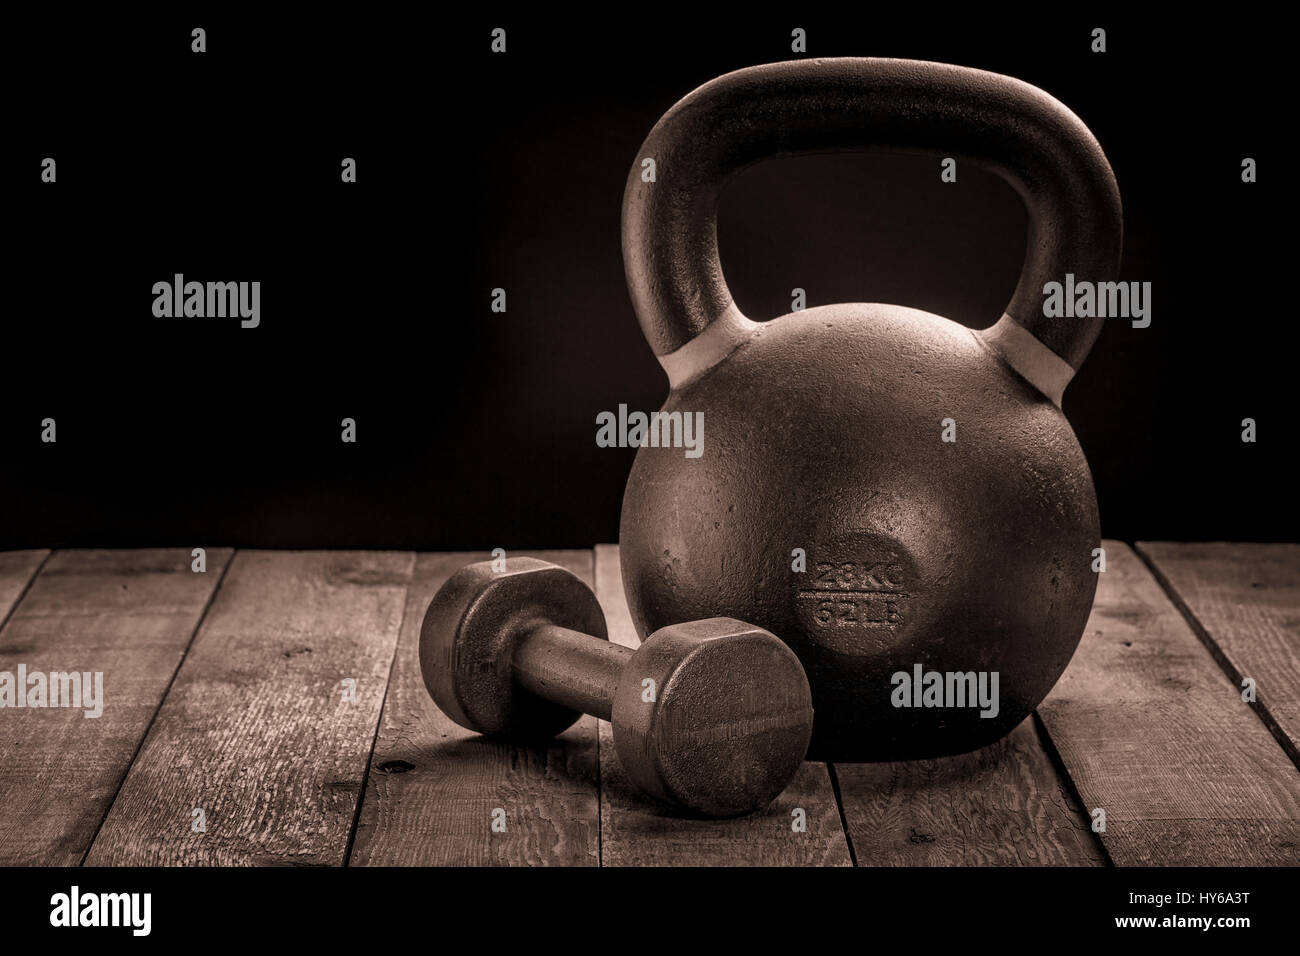 exercise weights - a heavy iron kettlebell and dumbbell on a wooden rustic deck - a home gym concept, sepia toning Stock Photo